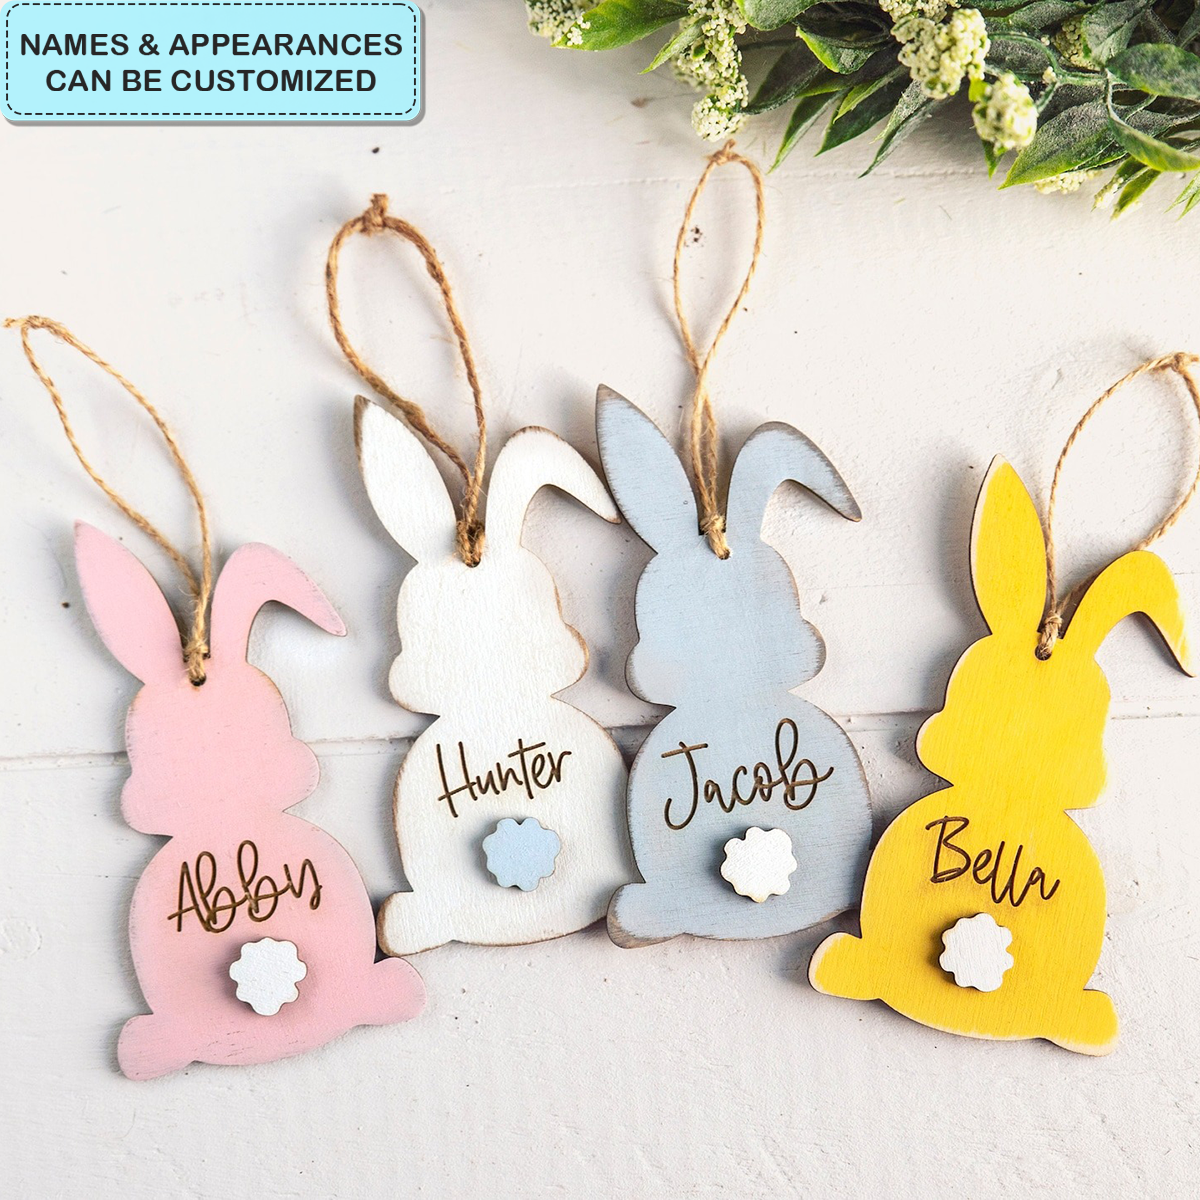 Lovely Bunny Decor Tag - Personalized Custom 2 Layer Basket Tag - Easter Gift For Family Members, Grandma, Mom